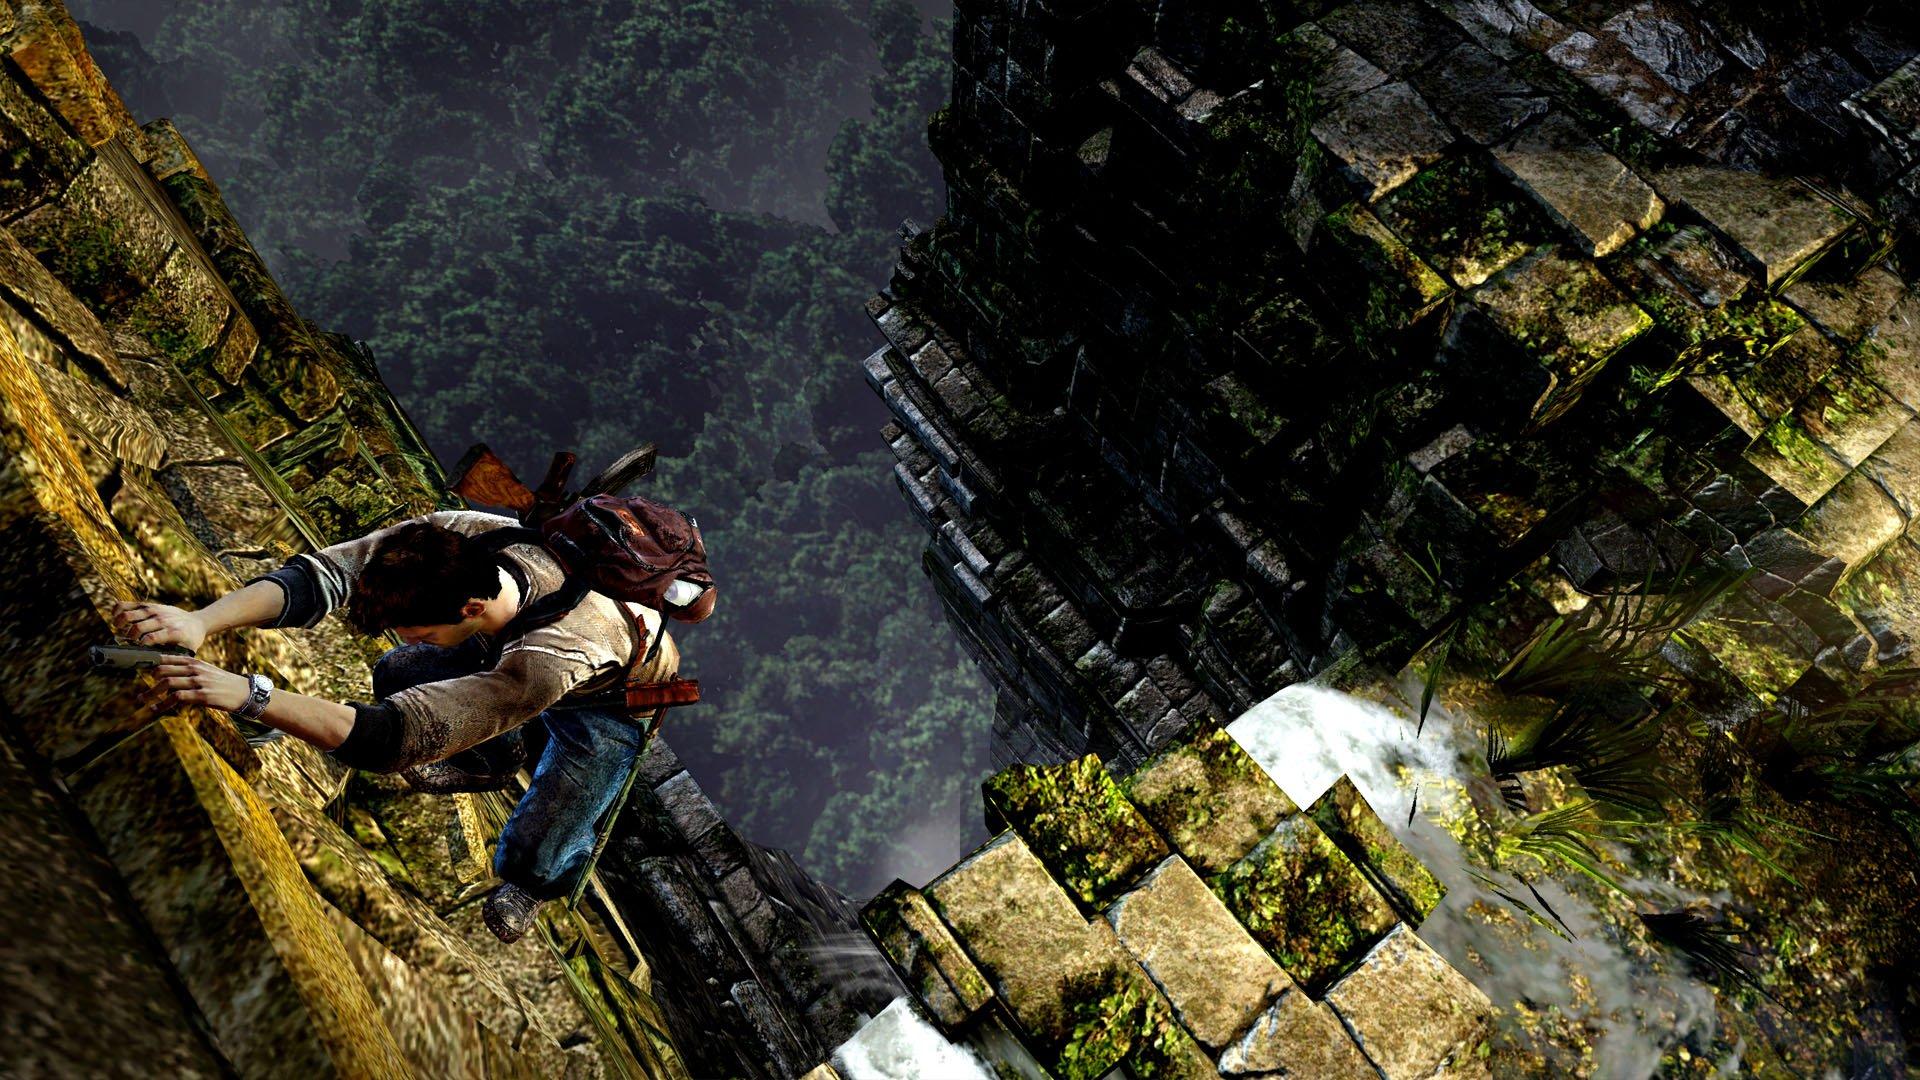 Uncharted: Golden Abyss - PS Vita